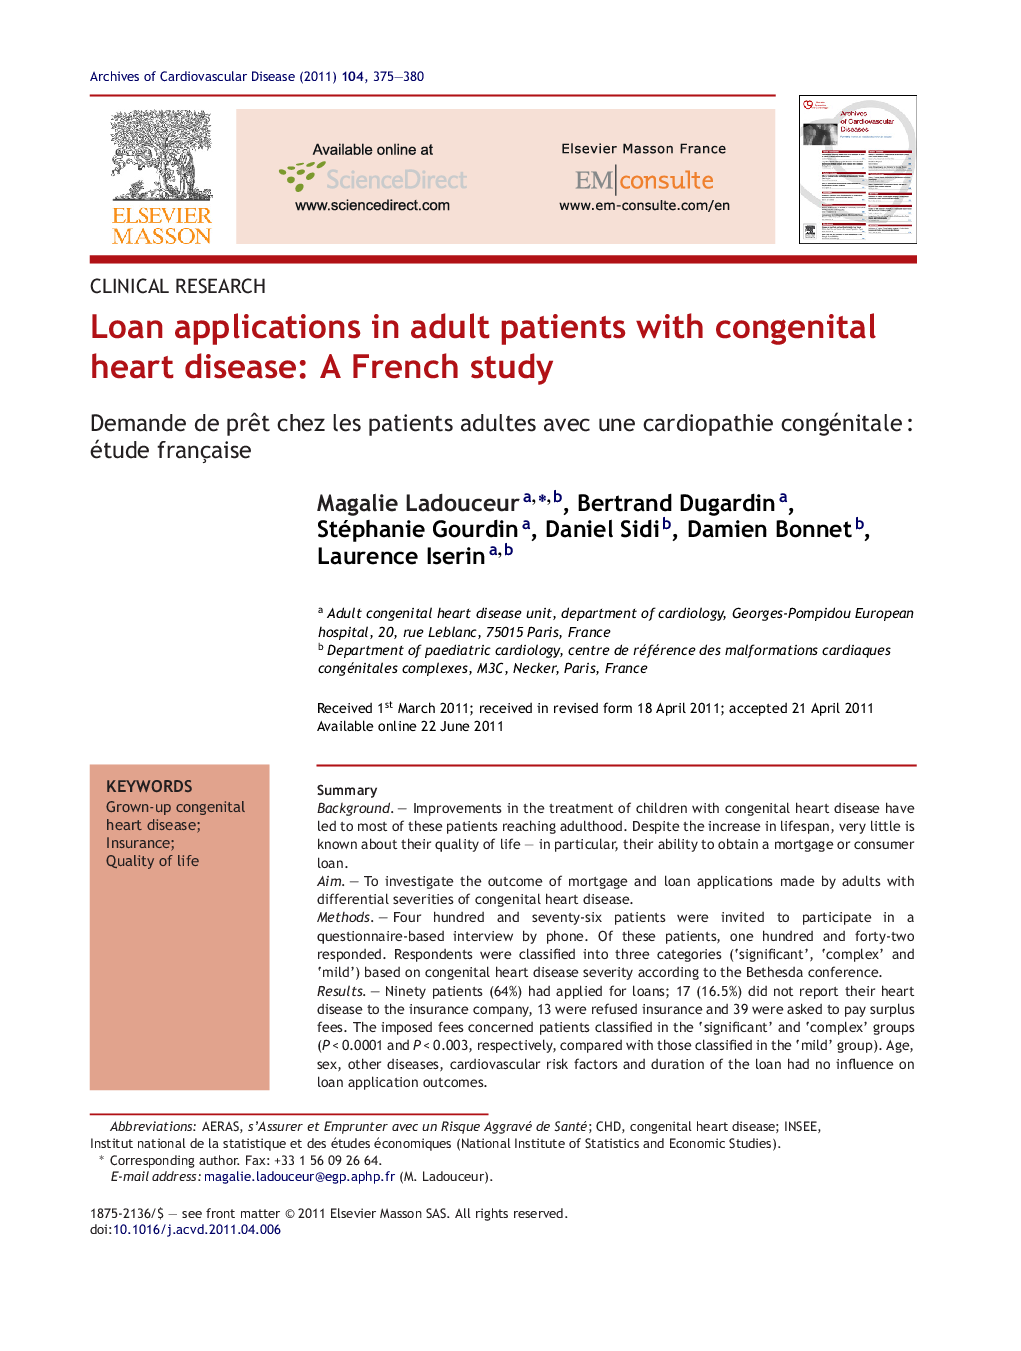 Loan applications in adult patients with congenital heart disease: A French study